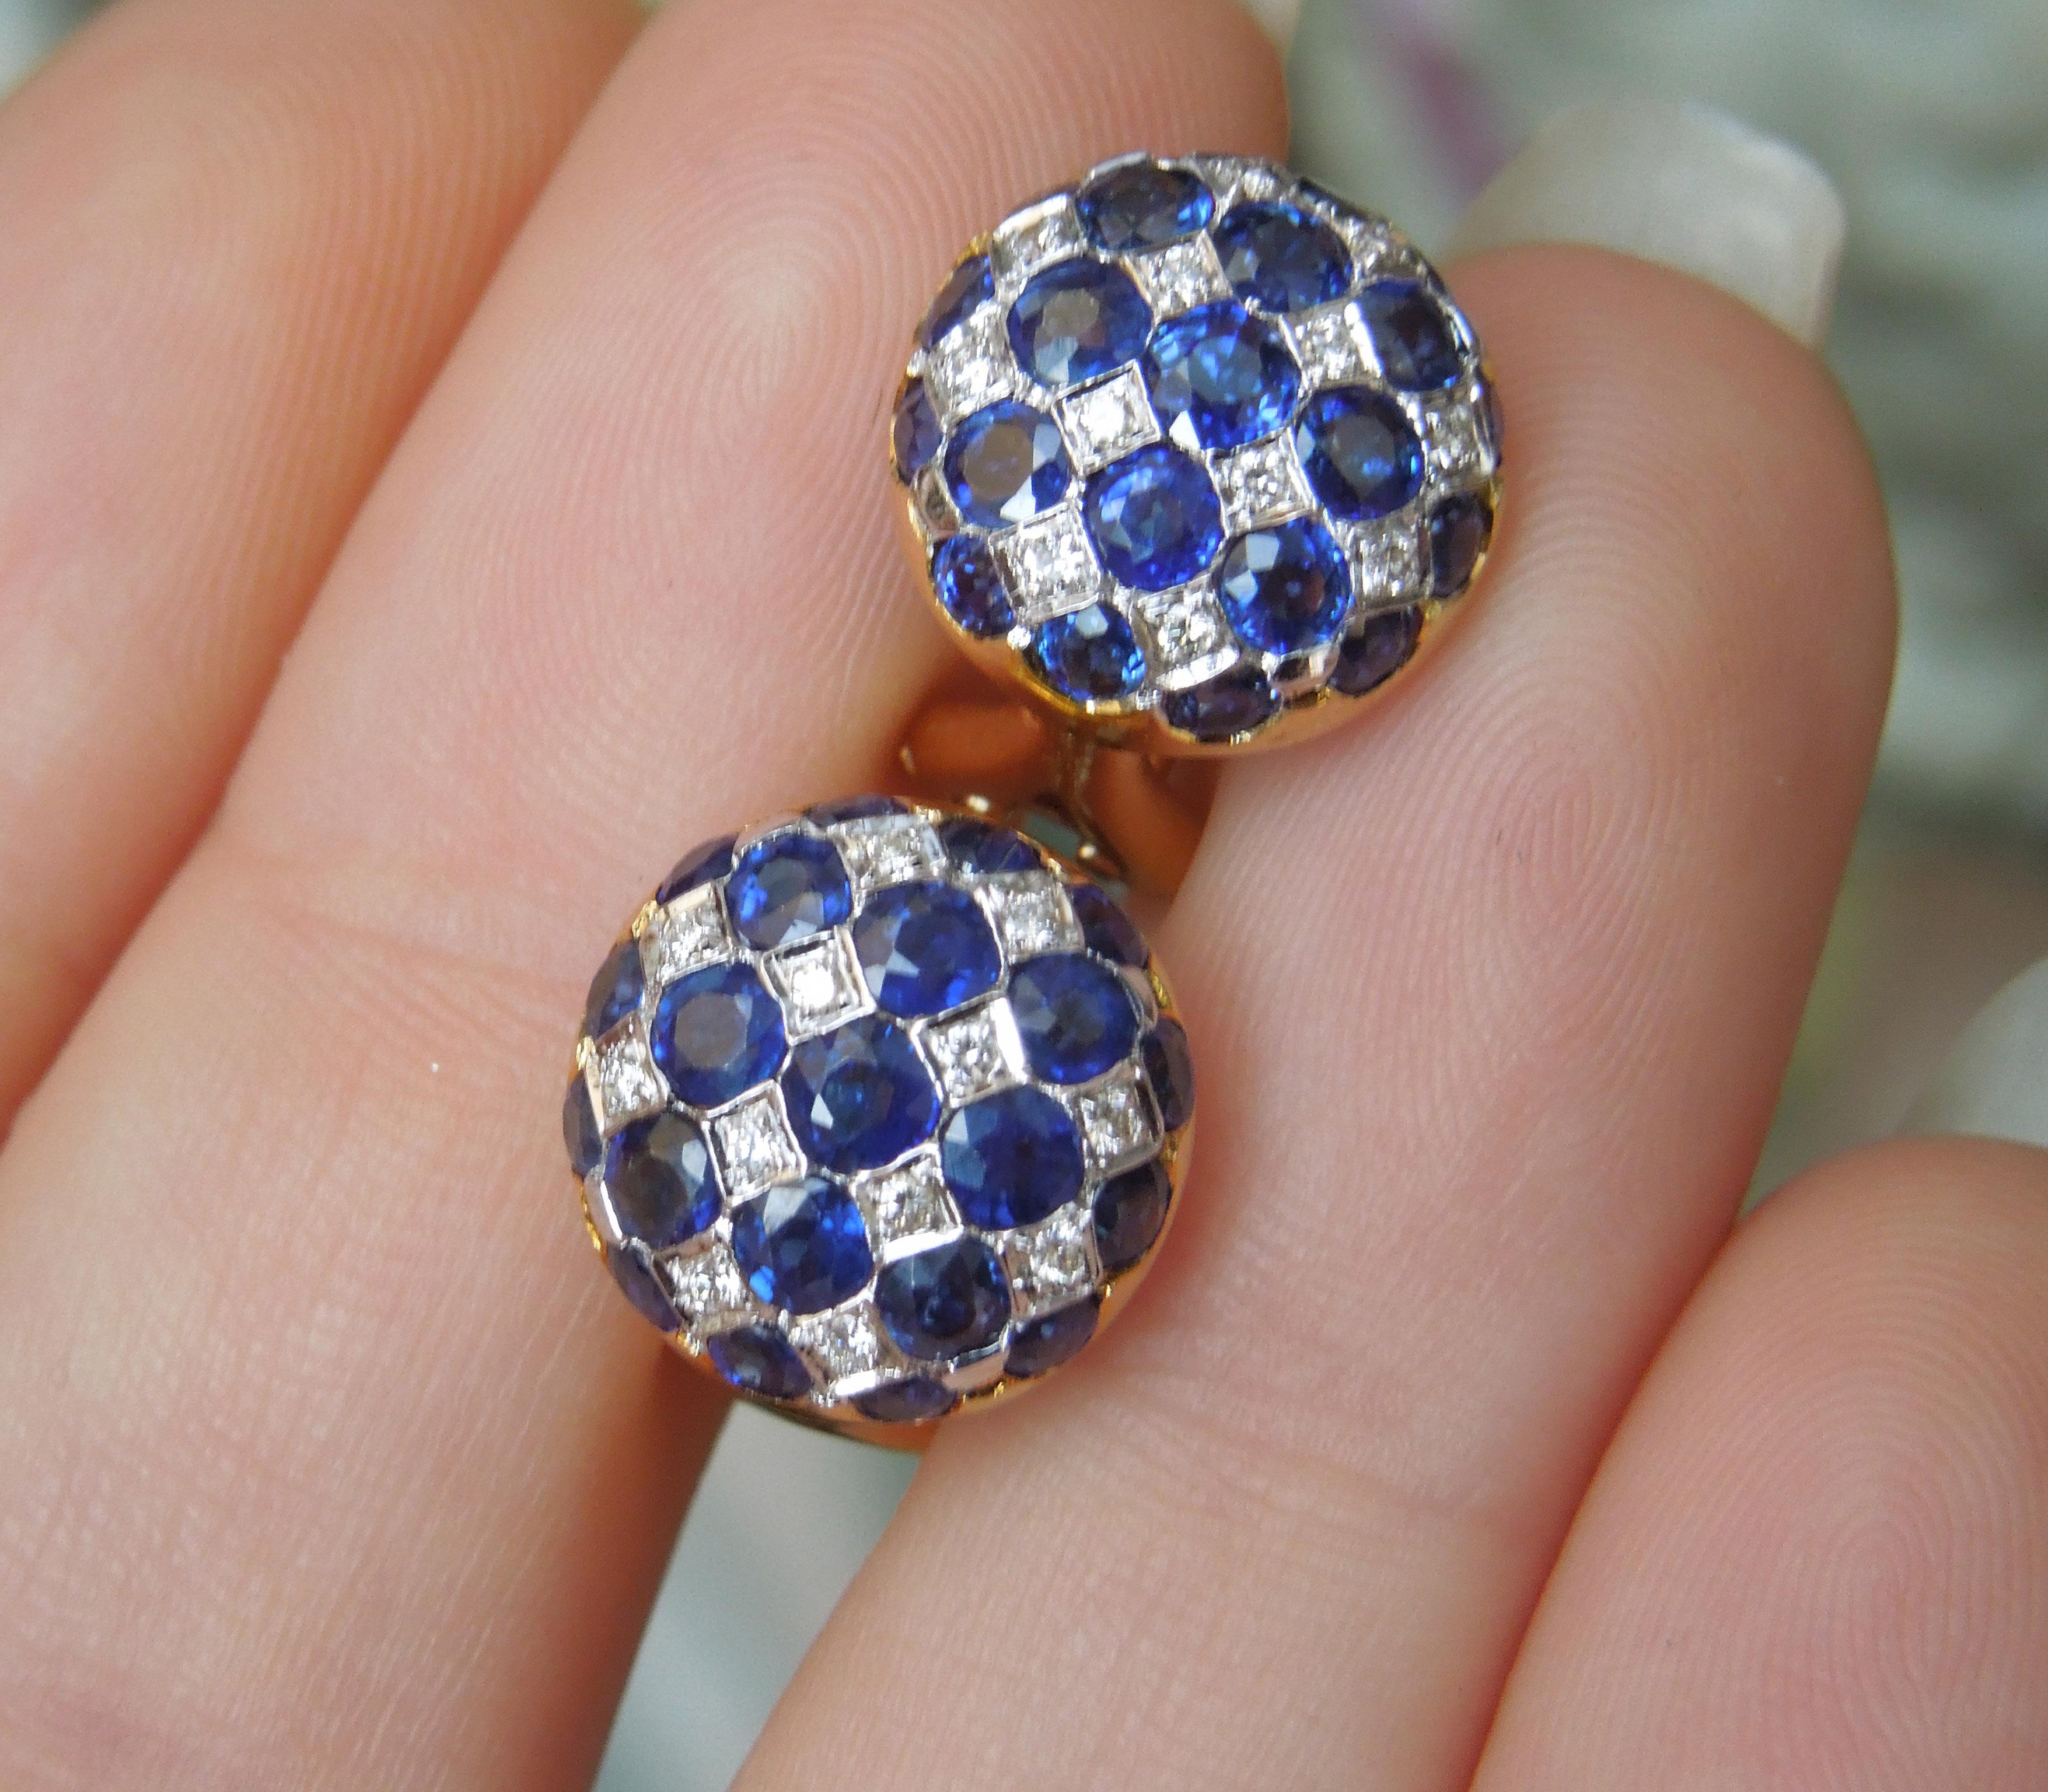 Earrings in a button-shaped design first became popular in the 30s and 40s. These particular earrings are attributed more to the Art Deco era in this symmetrical checkerboard pattern. Featuring 42 Round cut Intense Kashmir Blue Sapphires totaling